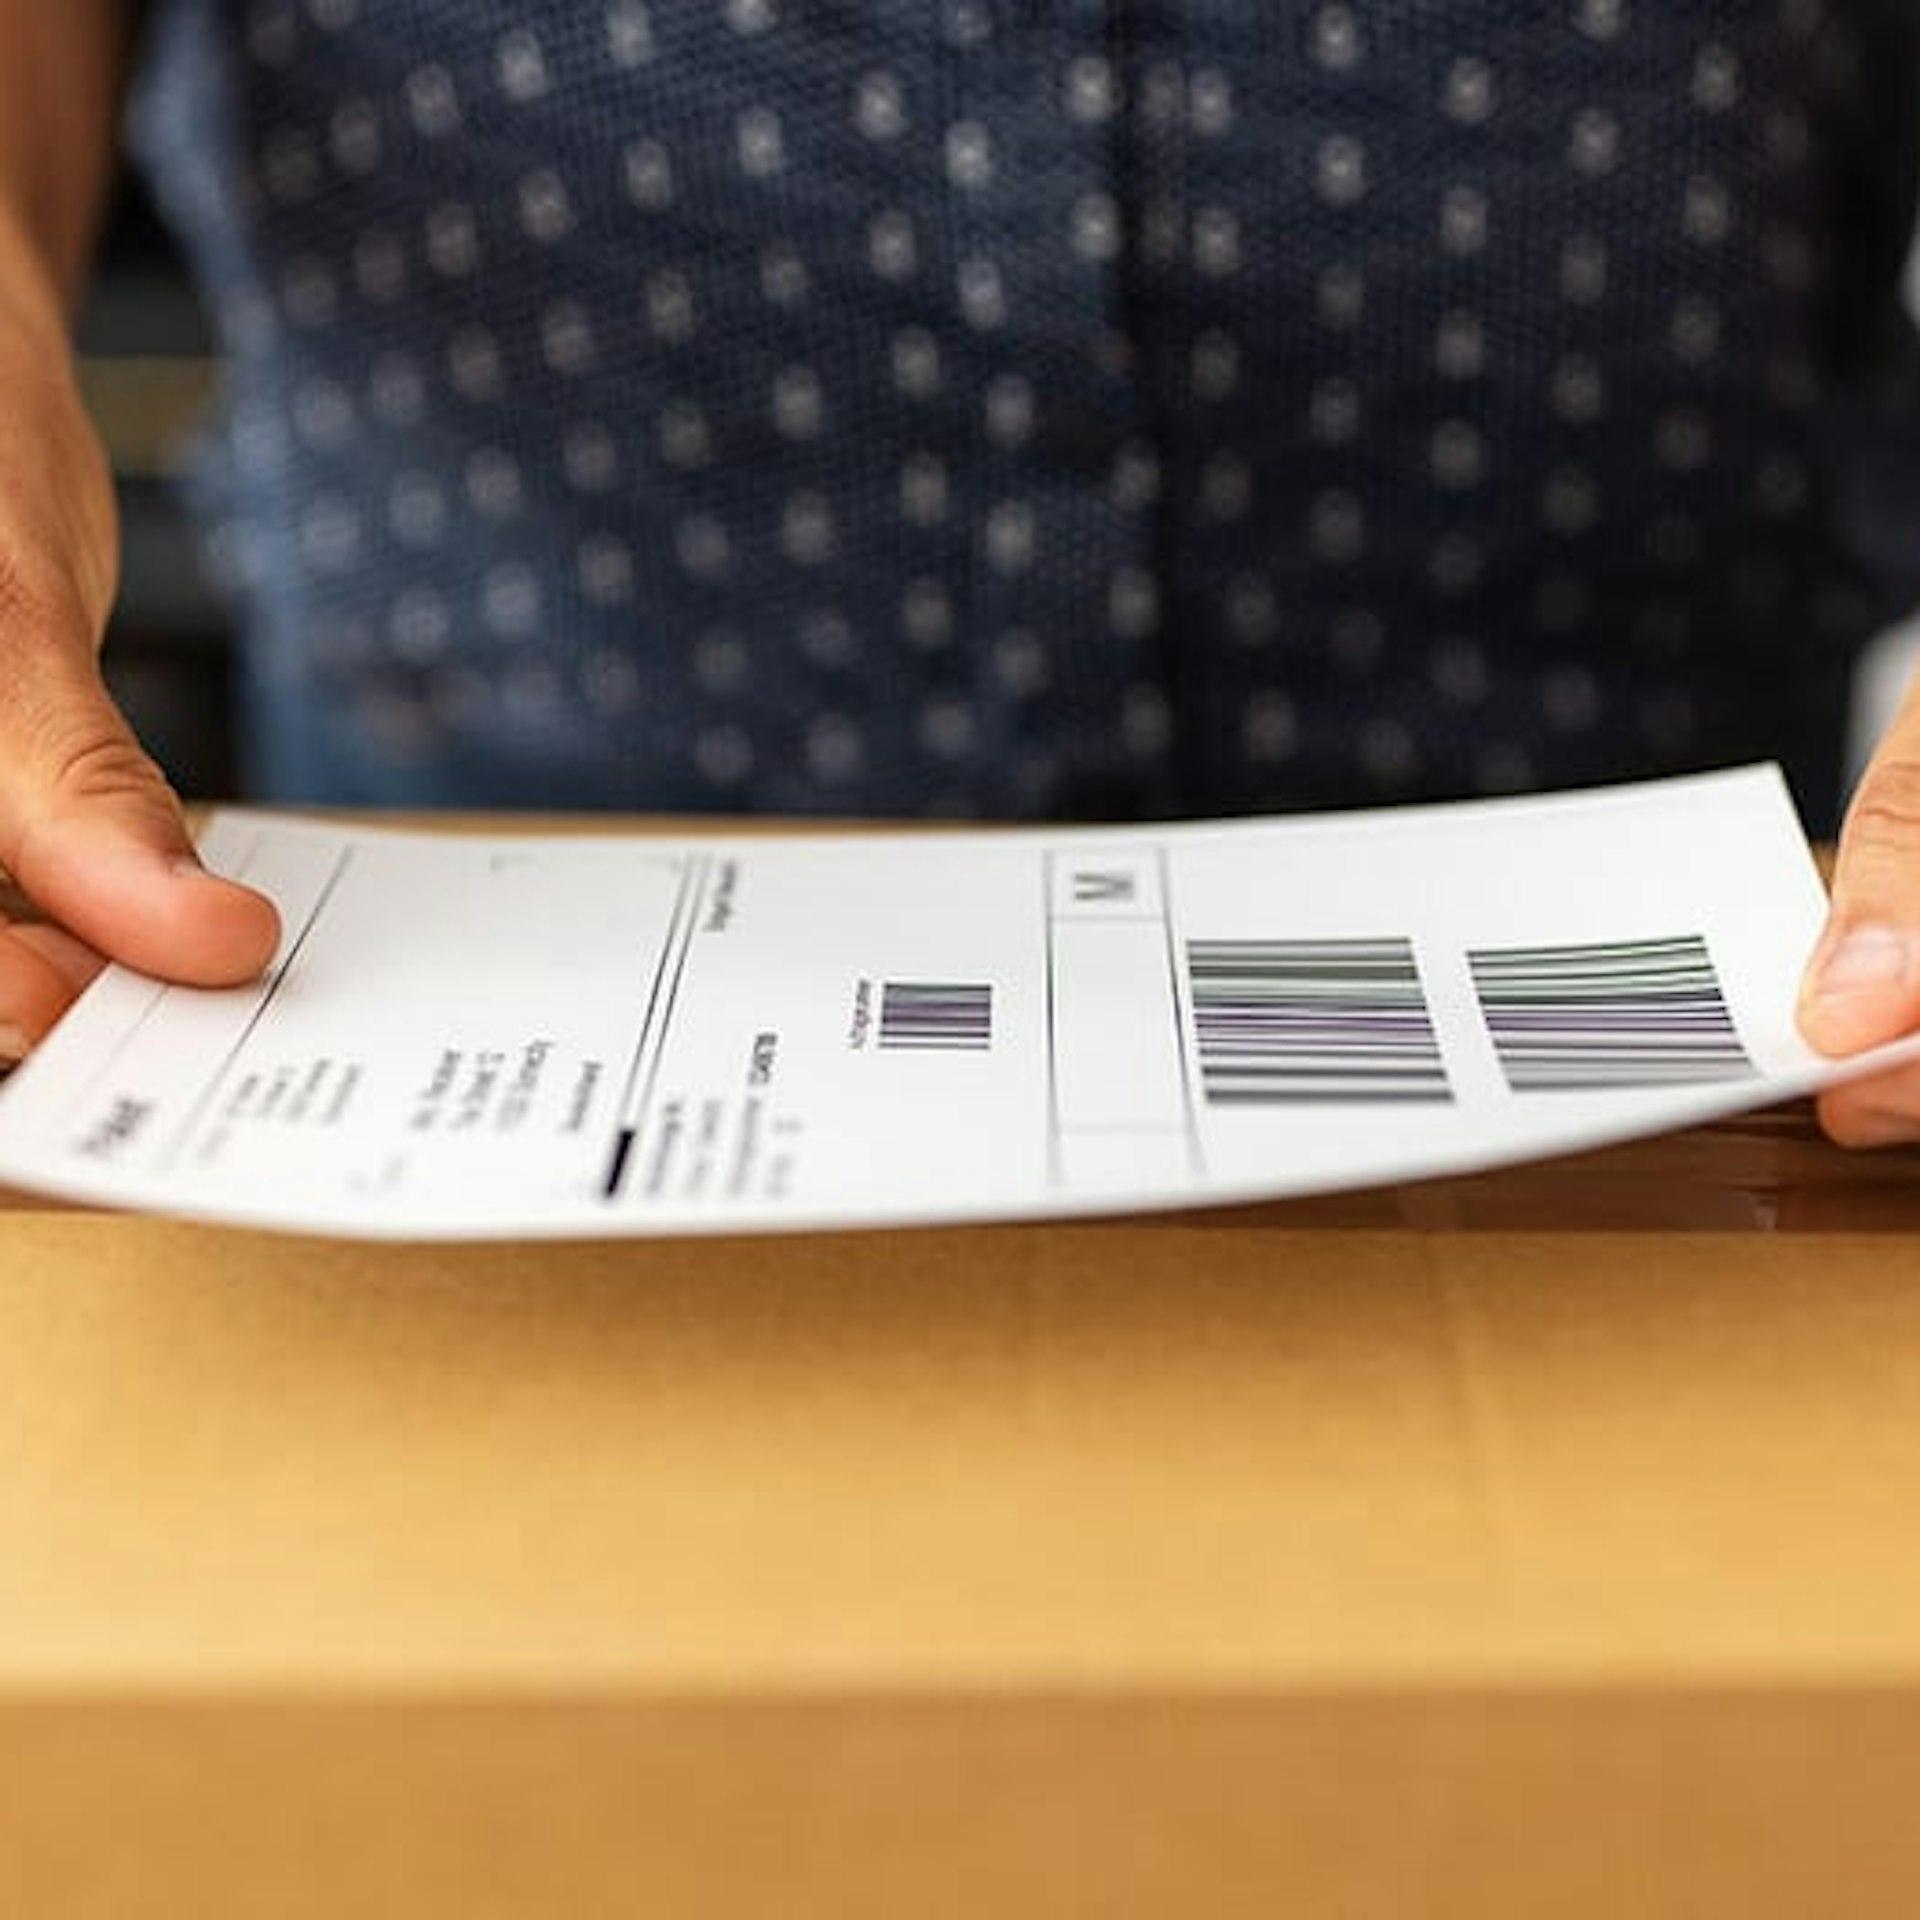 A new VAT e-commerce package has rolled out across the EU. In this article, we explain what OSS and IOSS mean for online sellers.